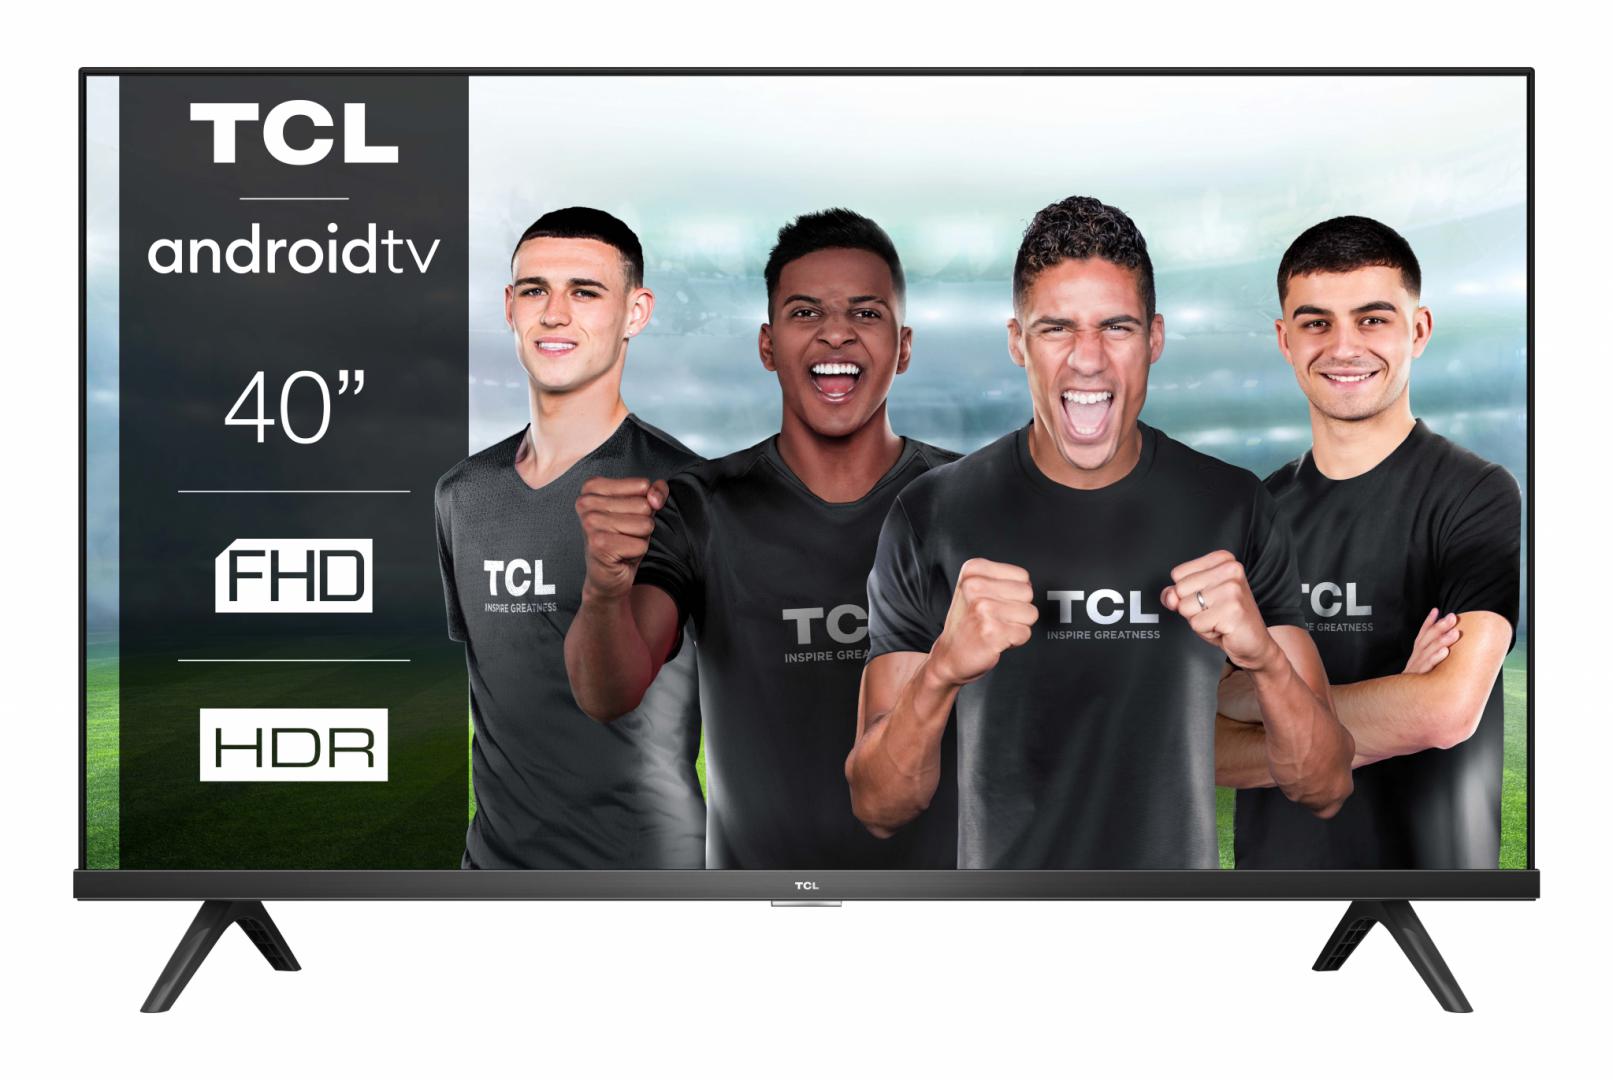 Televizor TCL LED 40S6200, 102 cm (40"), Hotel TV, Smart Android TV, FHD